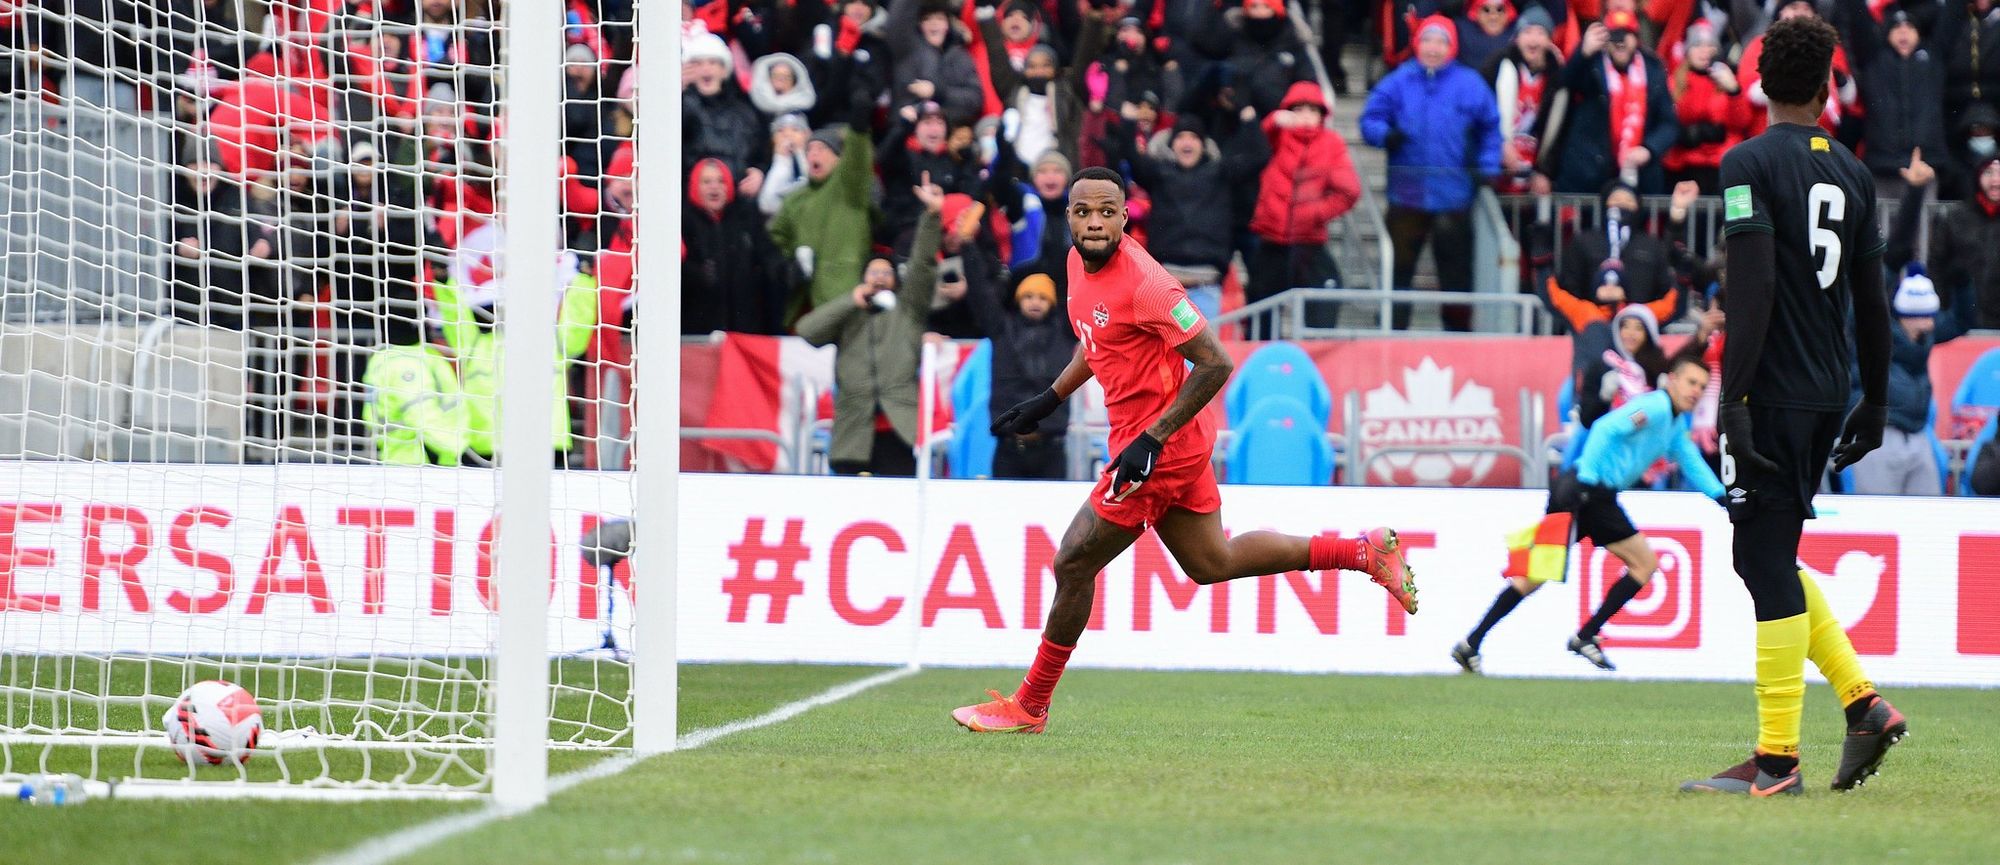 Canada vs. Panama in World Cup qualifying: What you need to know